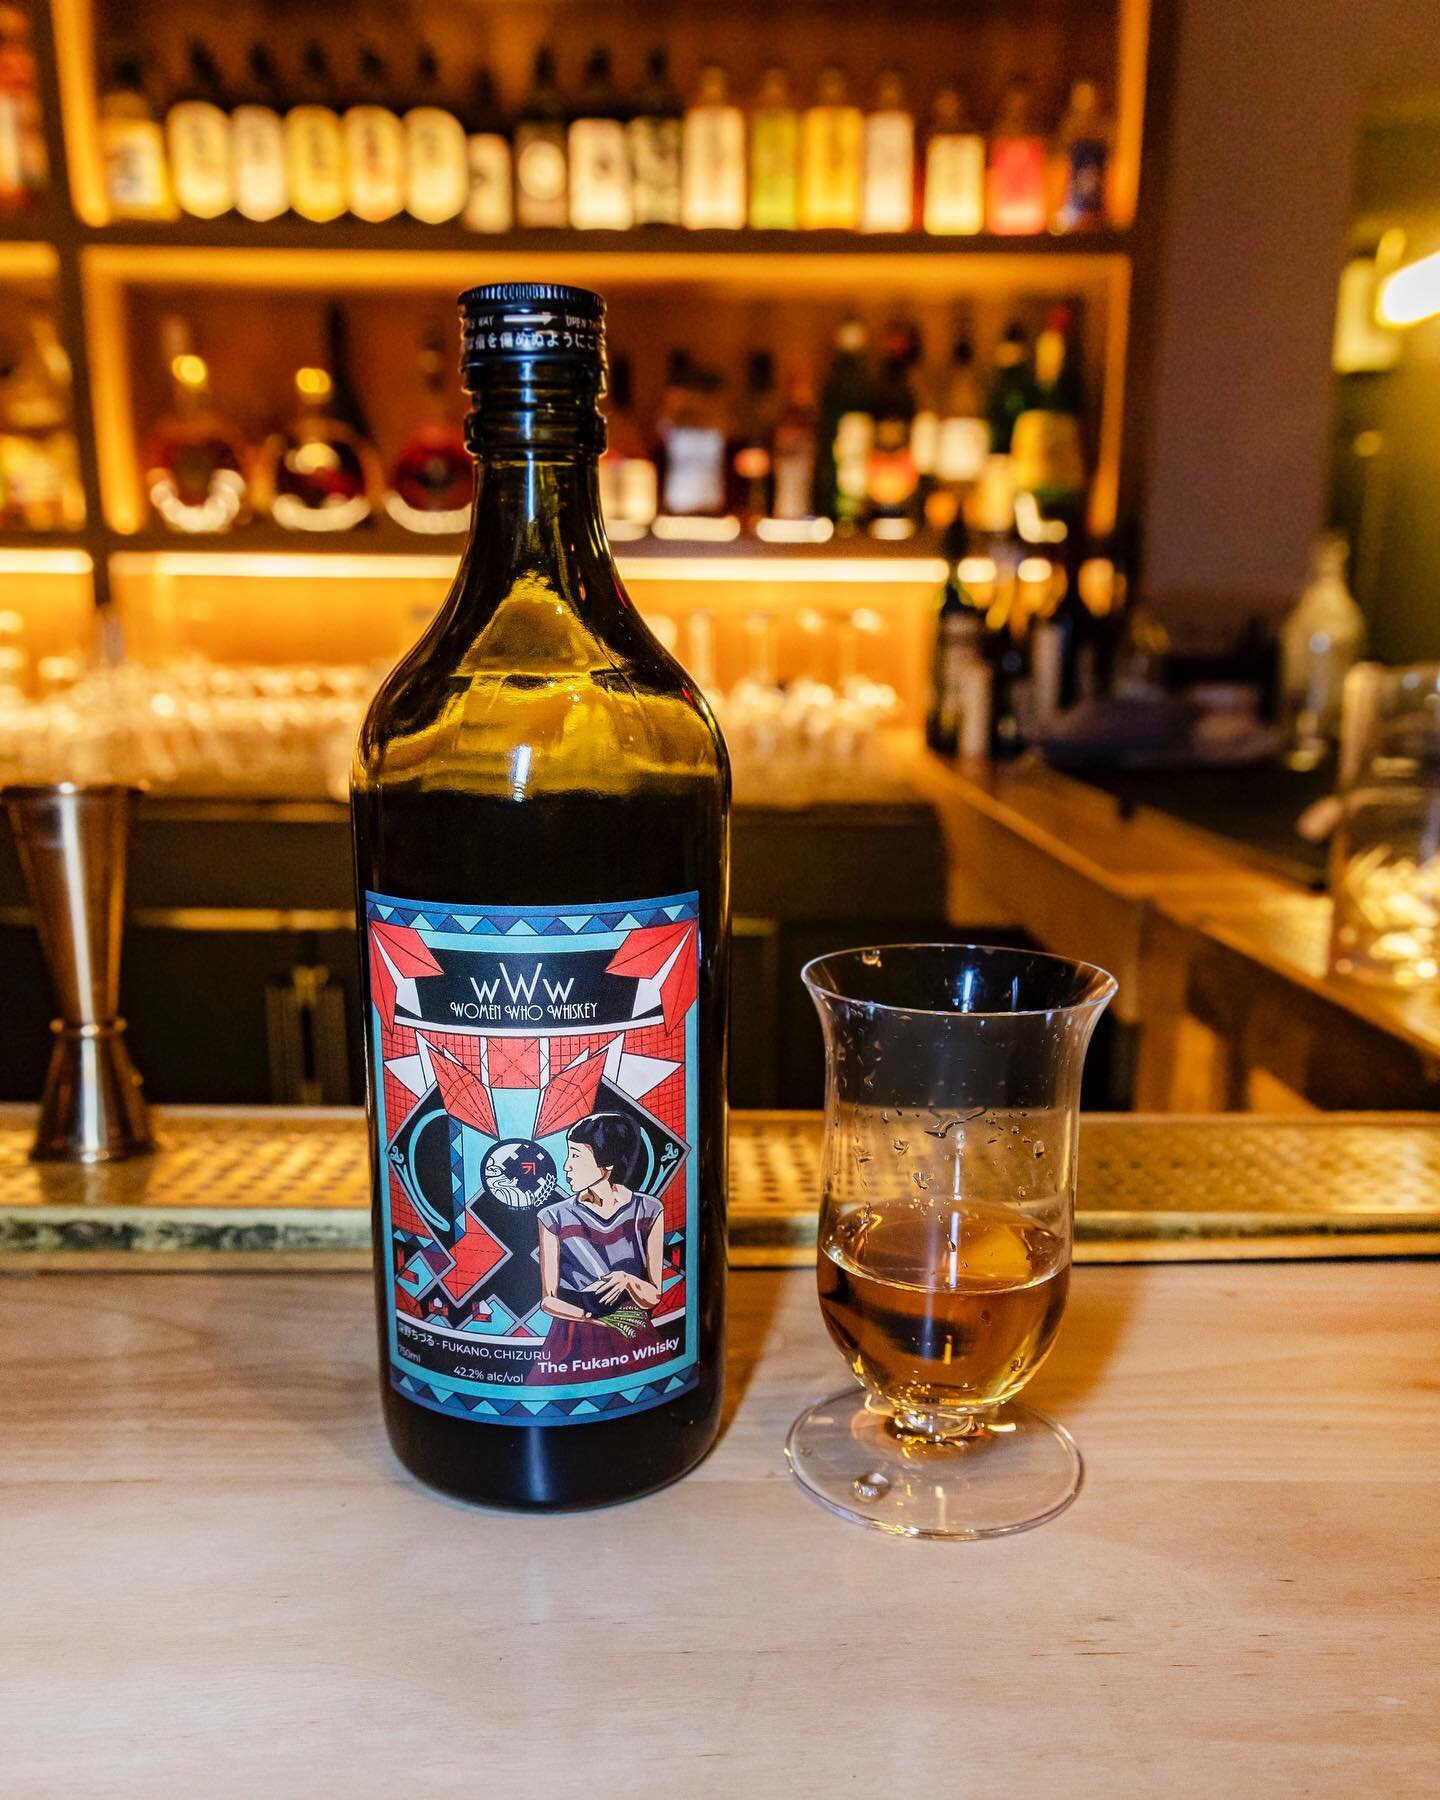 #WhiskyWednesday - Have you tried this limited edition Fukano Whisky? Women Who Whiskey partnered with Fukano to create this bright and refreshing whisky.
&bull;
&bull;
&bull;
 #MrsFishLA #SushiArtWhisky #JapaneseArt #DTLA #LosAngeles #Sushi #Whisky 